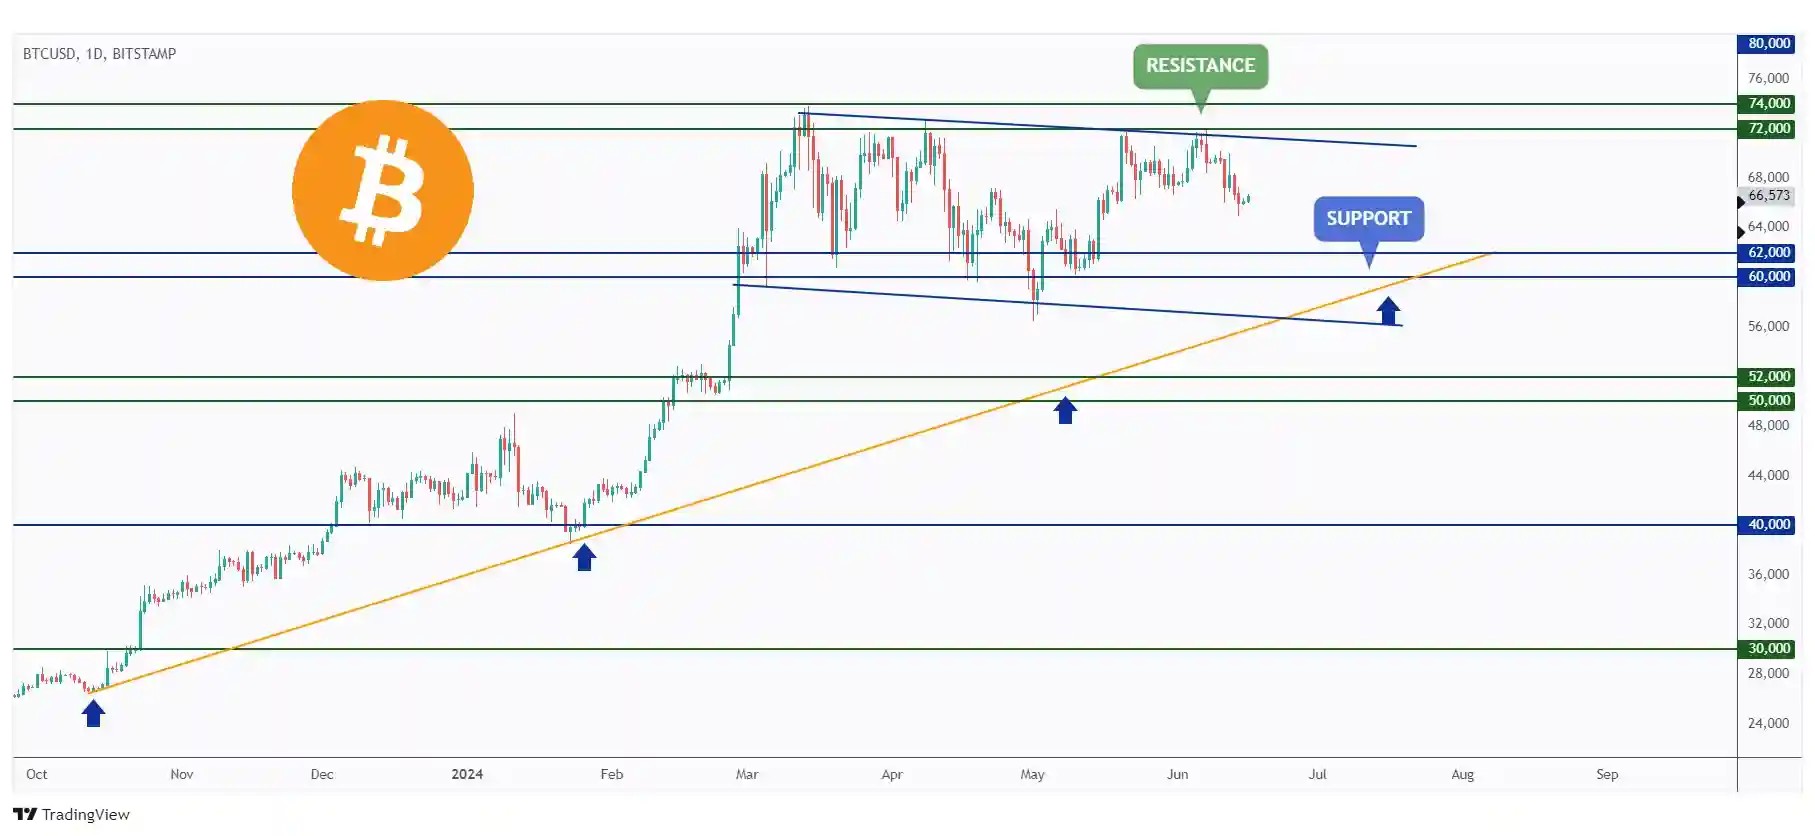 BTC daily chart overall bearish trading within the falling channel in blue and targeting the $62,000 support level.